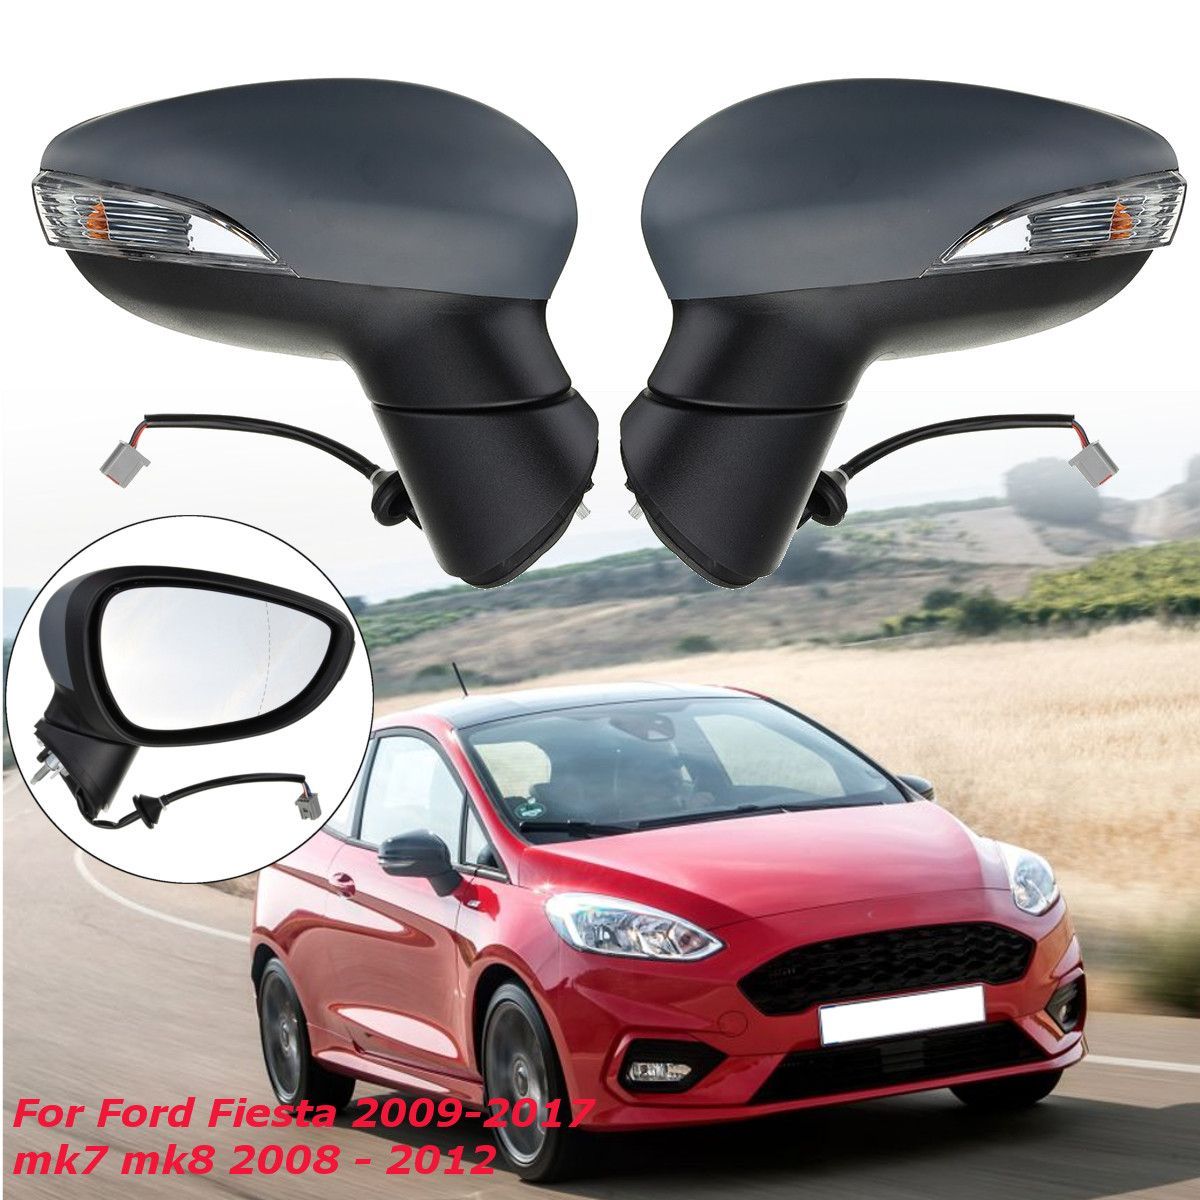 Car-Door-Wing-Mirror-Indicator-Driver-Passenger-Side-Manual-Fold-Left--Right-For-Ford-Fiesta-09-17-1609251